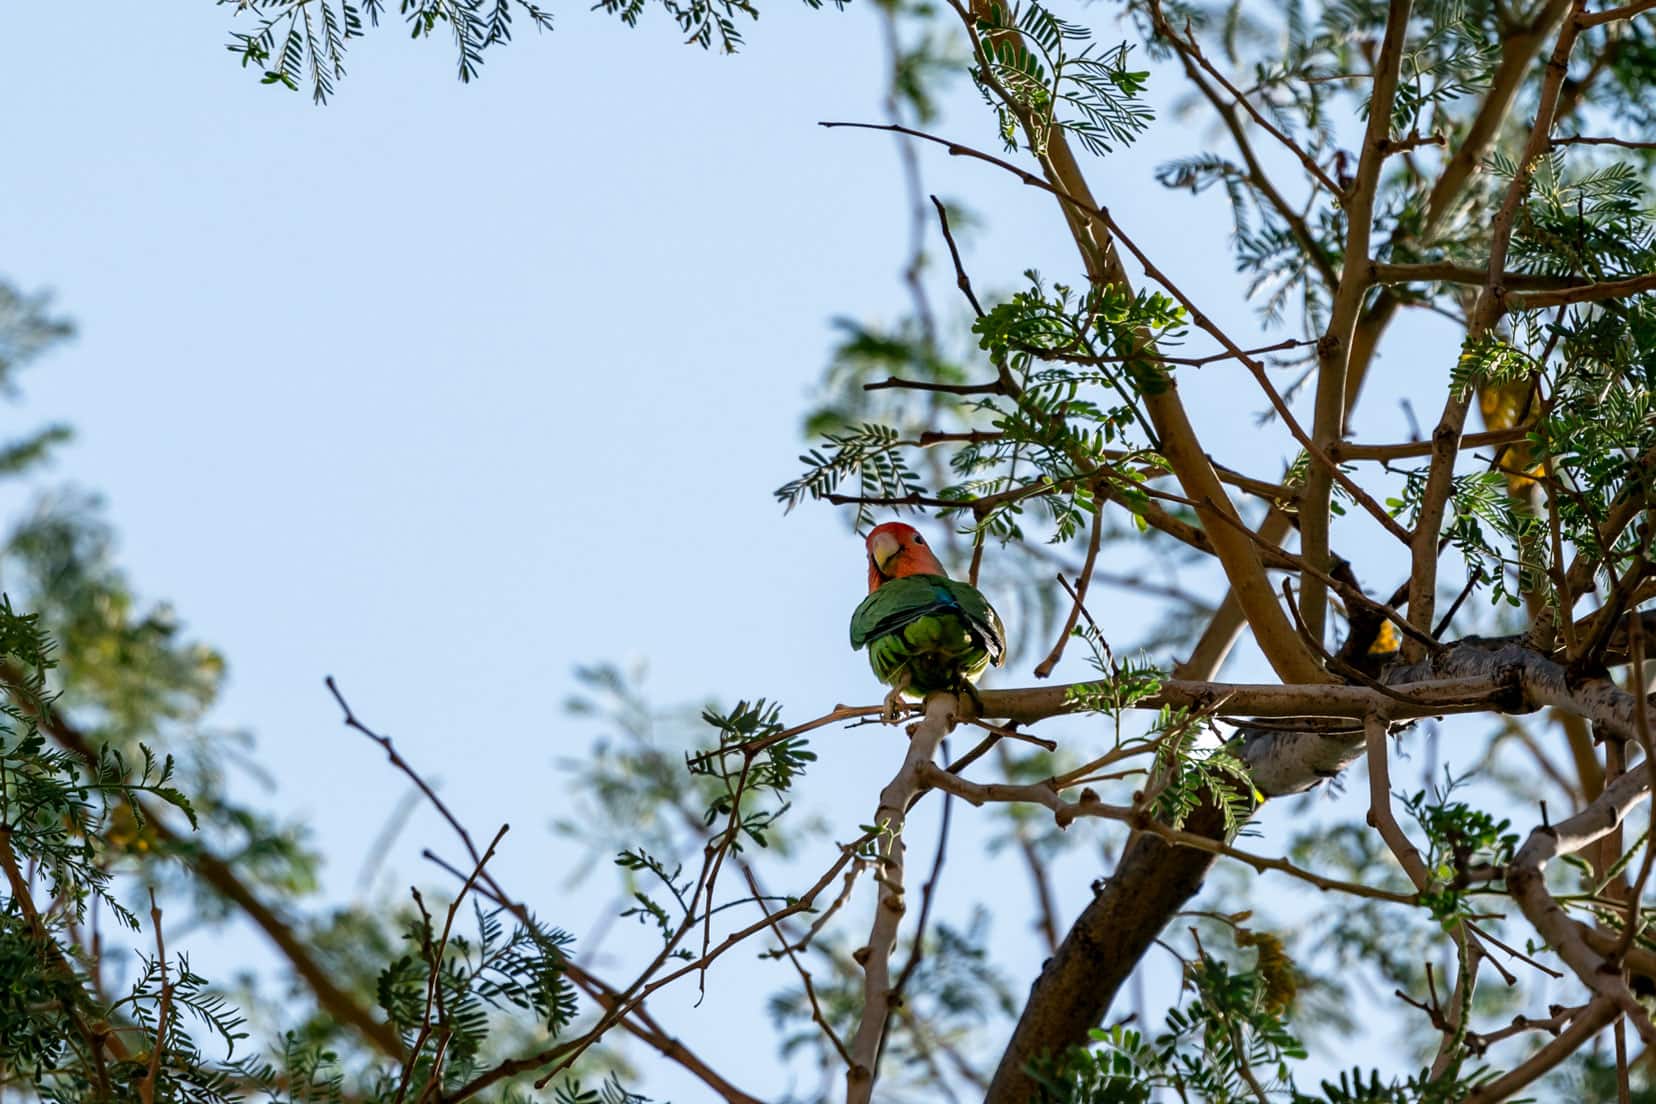 Rosy faced Lovebird in a tree - looks a little like a parrot with a red/pink head and green feathers